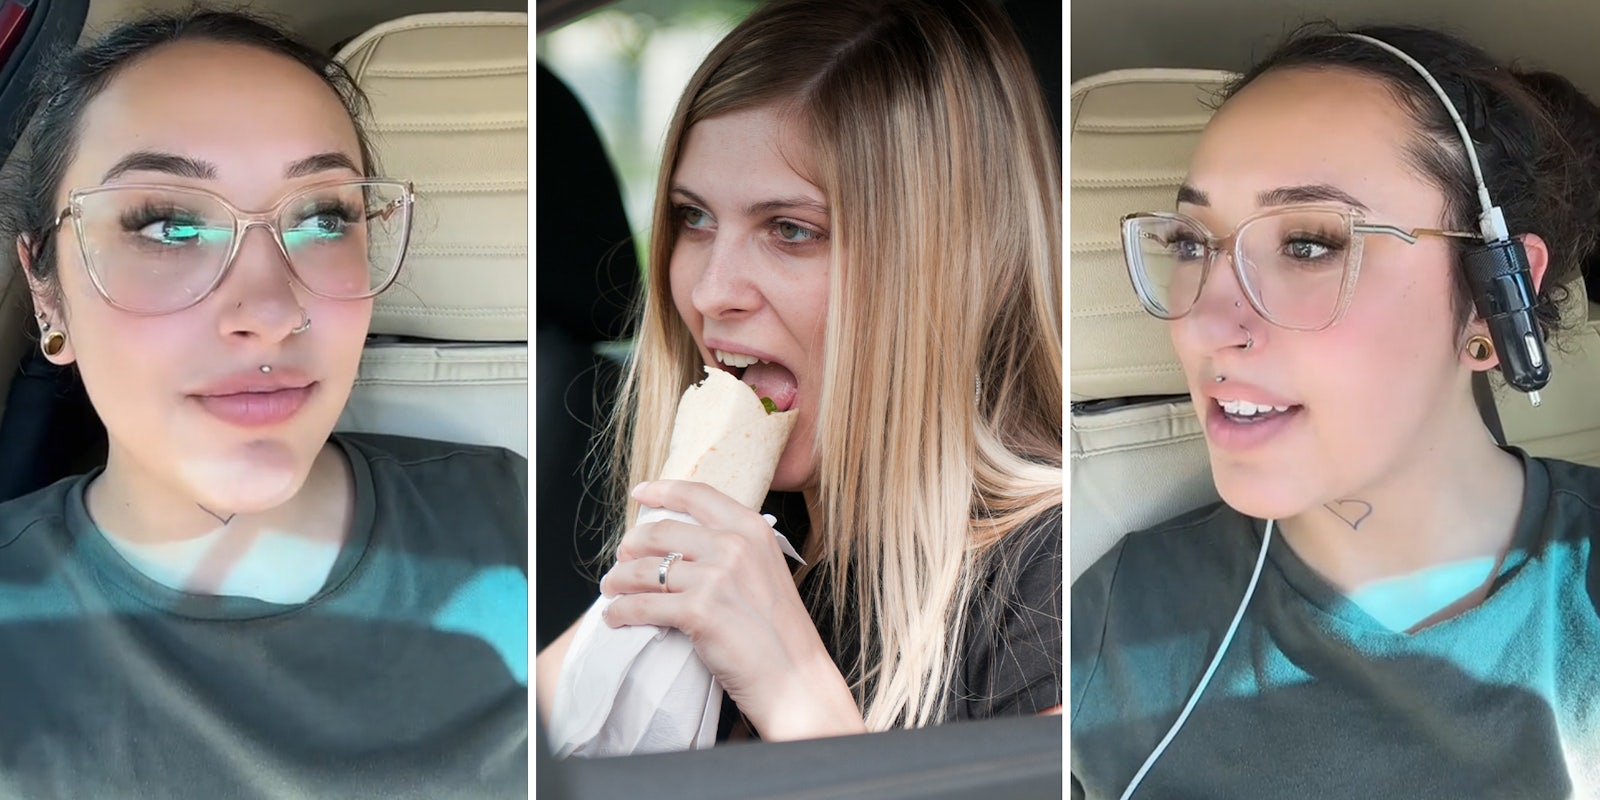 Worker says customer parked in the drive-thru for 20 minutes to eat her breakfast